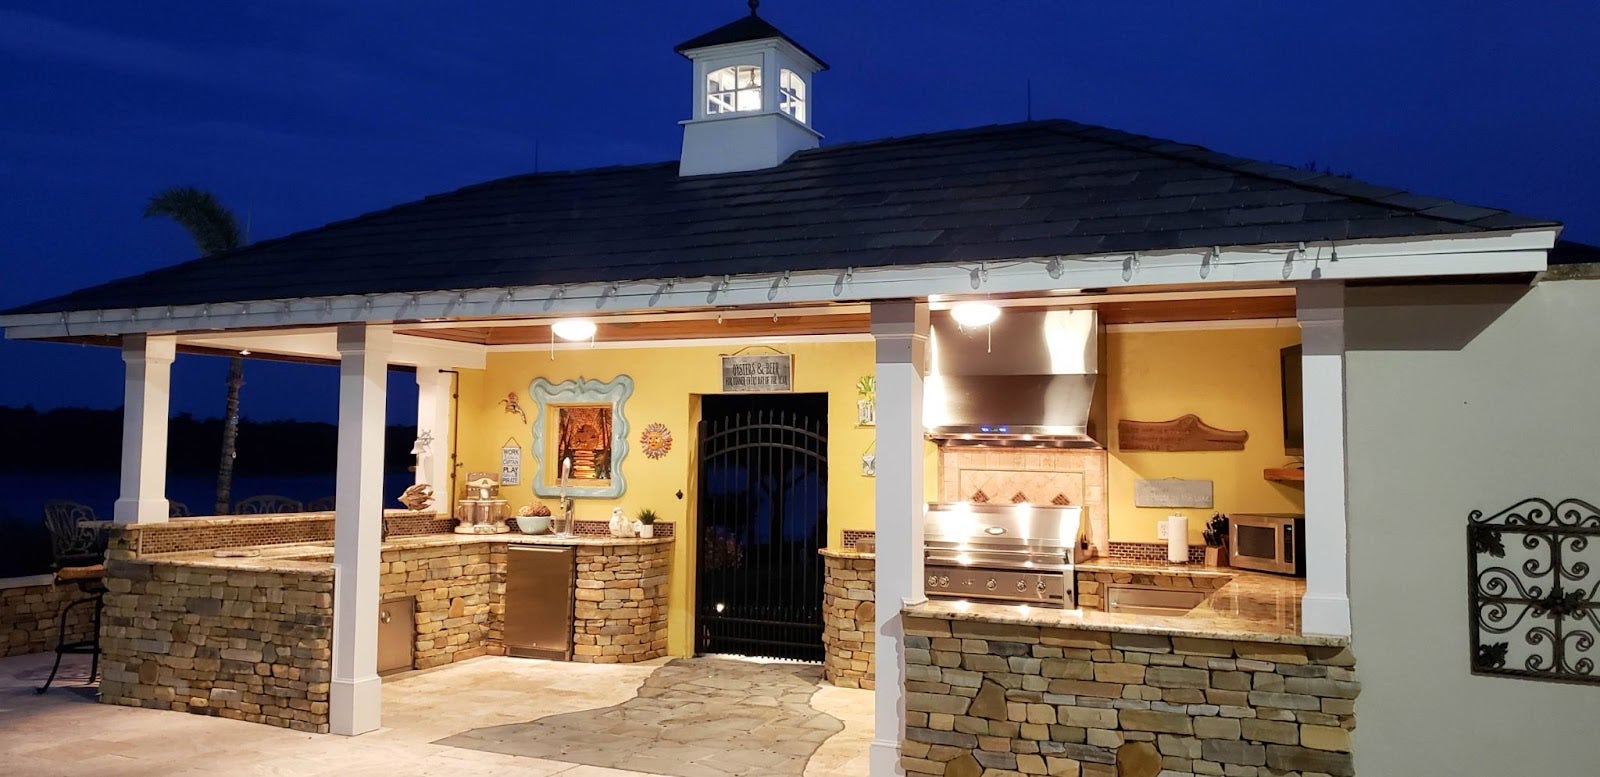 Serene Evening Kitchen: Proline hood keeps air clear for grilling under the stars in this charming outdoor kitchen. Warm lights highlight stone and yellow walls, creating a cozy space for gatherings or solo meals. - Proline Range Hoods - prolinerangehoods.com 